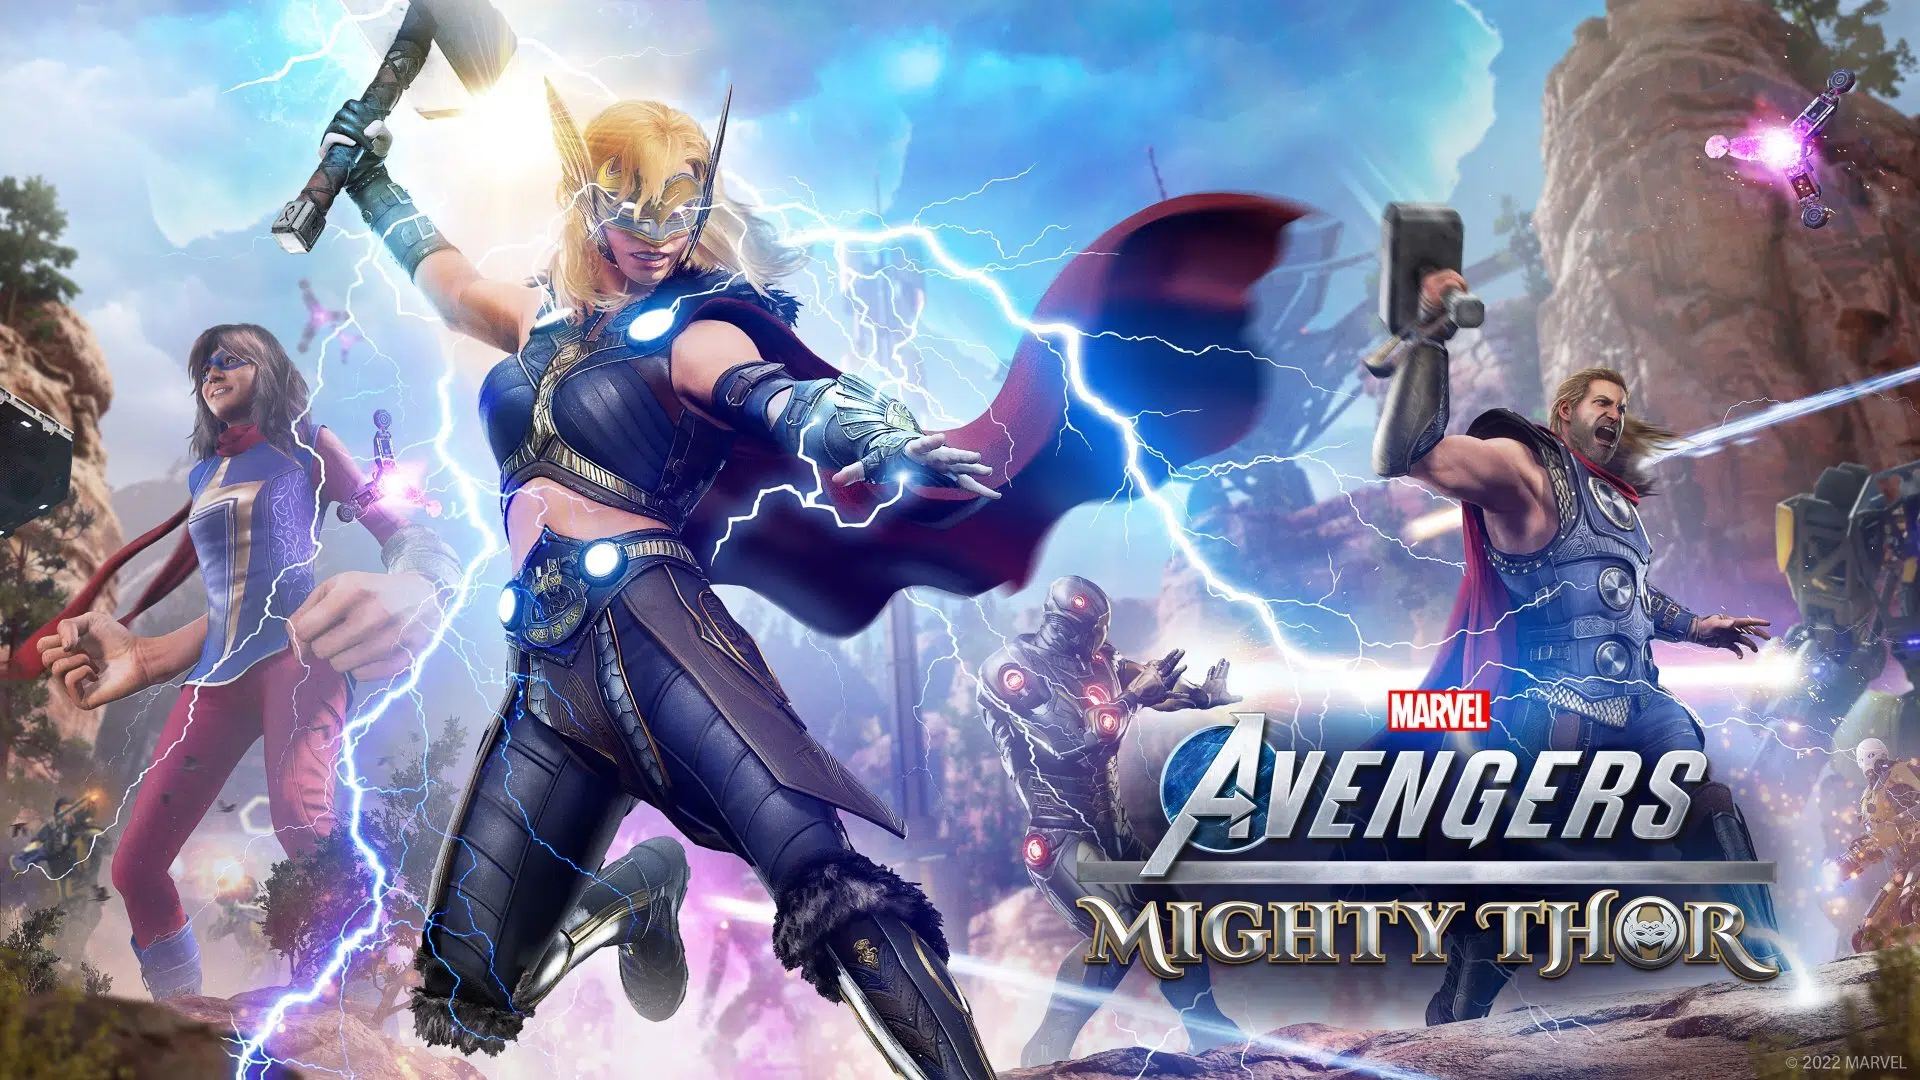 Marvel's Avengers Jane Foster Mighty Thor